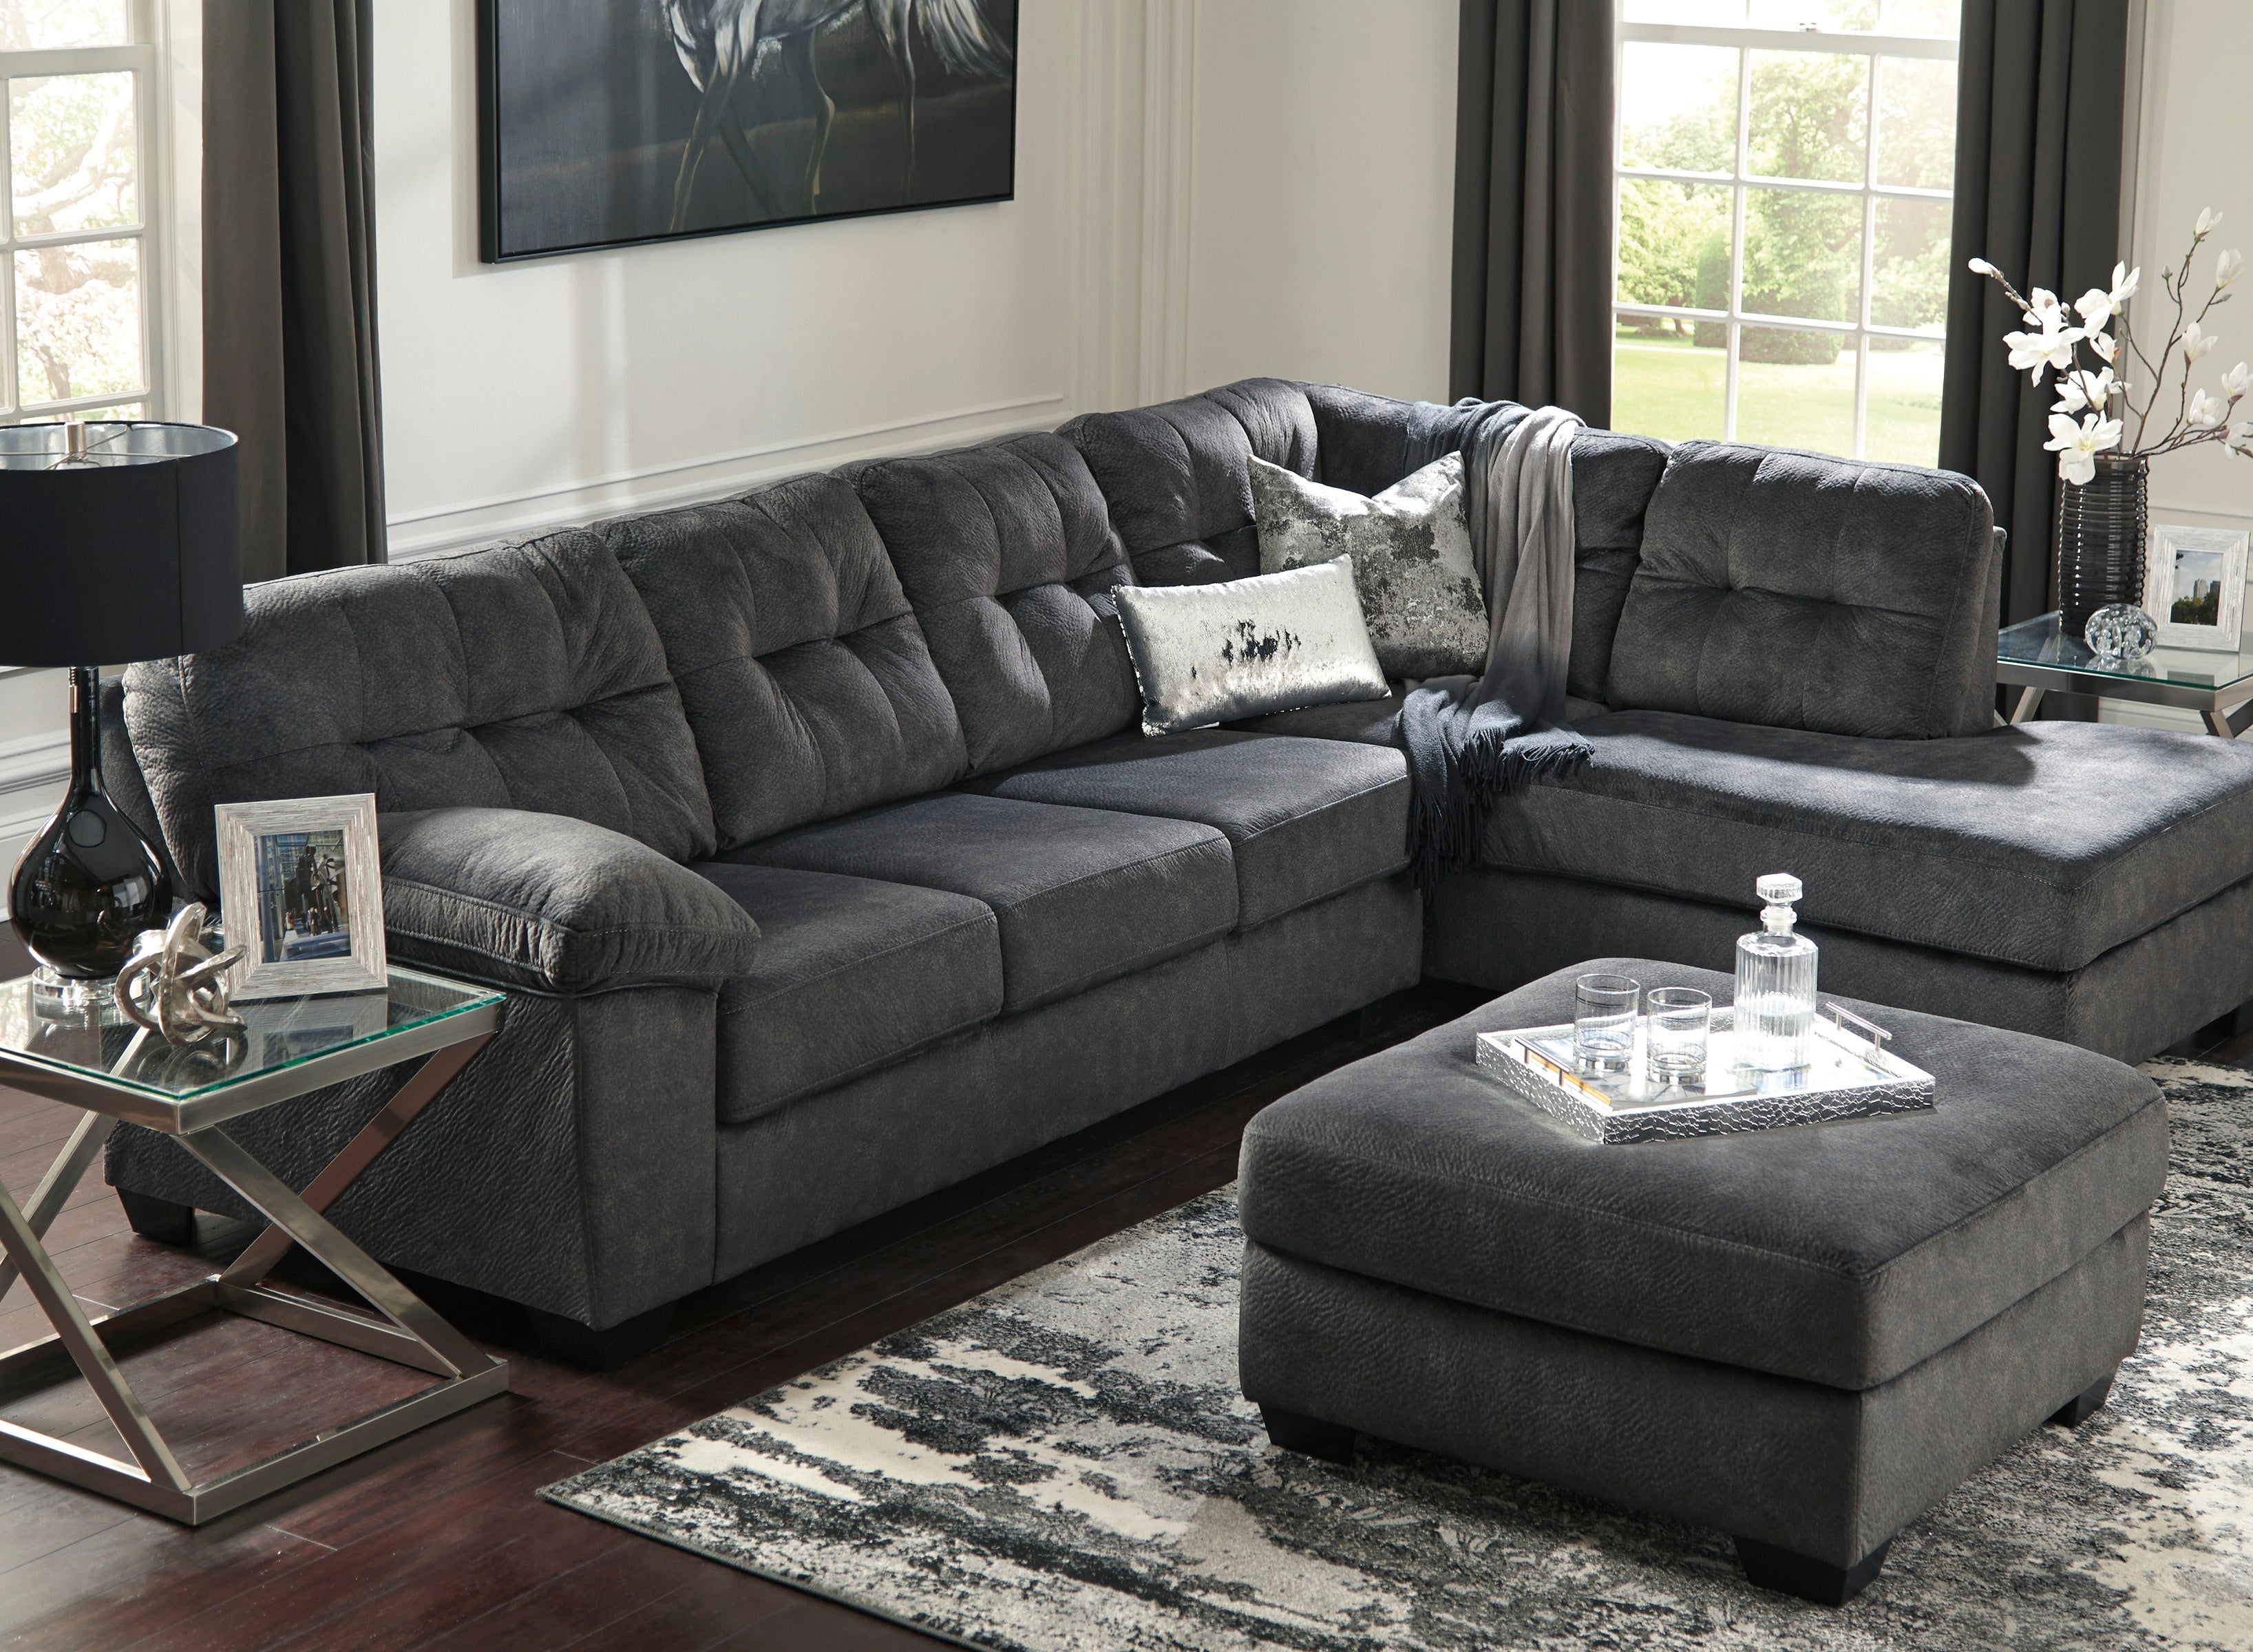 Accrington Granite 2-Piece RAF Chaise Sectional